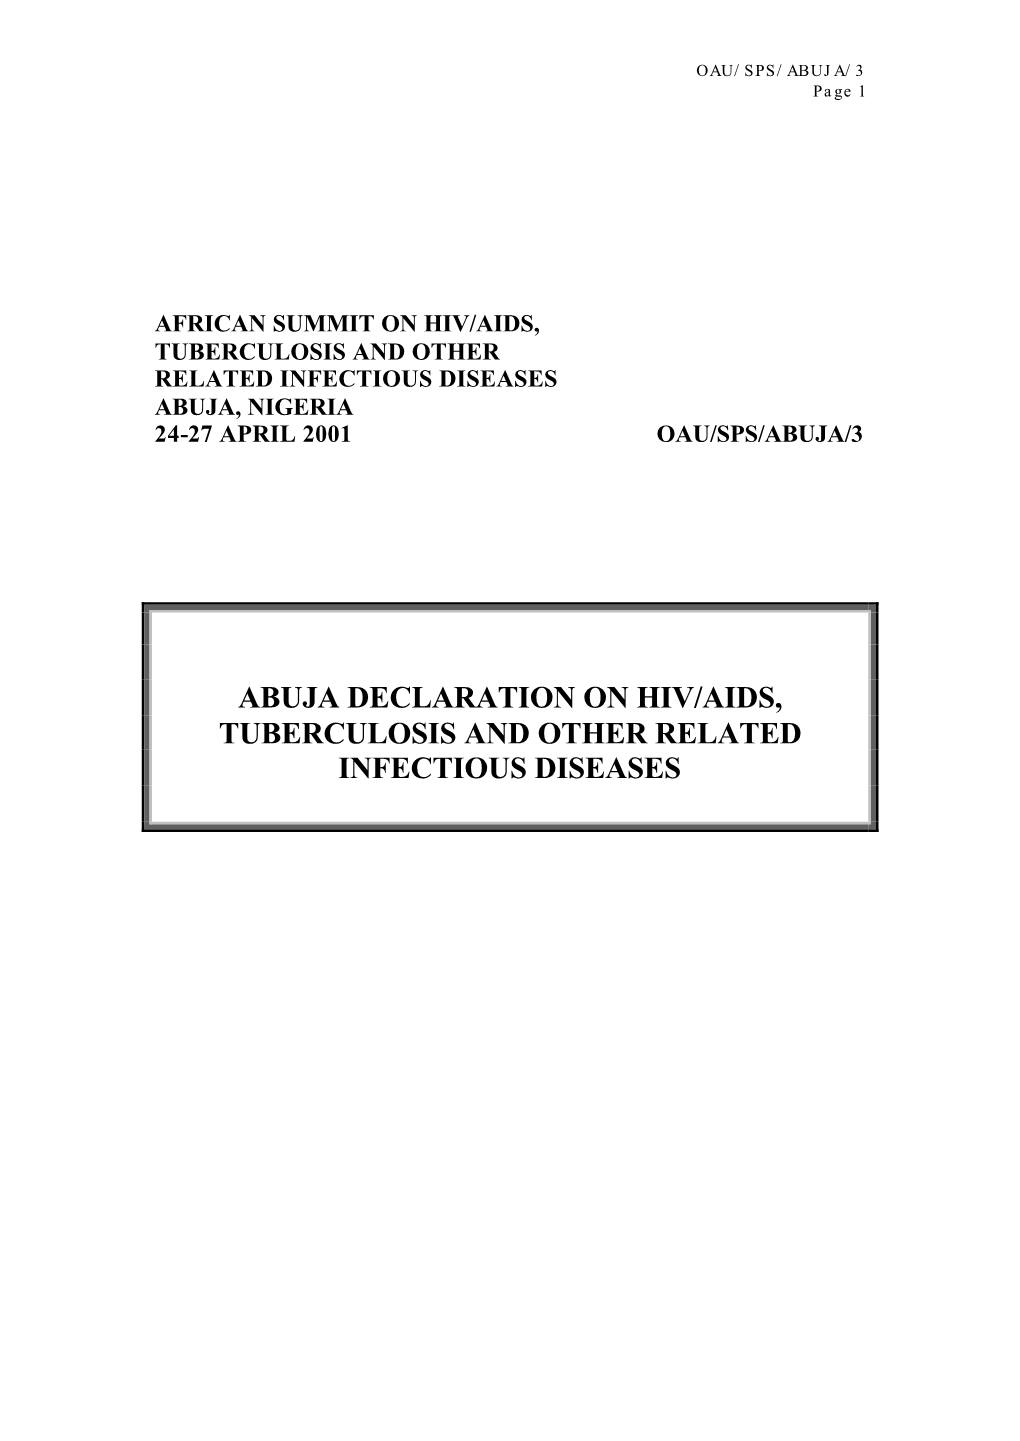 Abuja Declaration on Hiv/Aids, Tuberculosis and Other Related Infectious Diseases